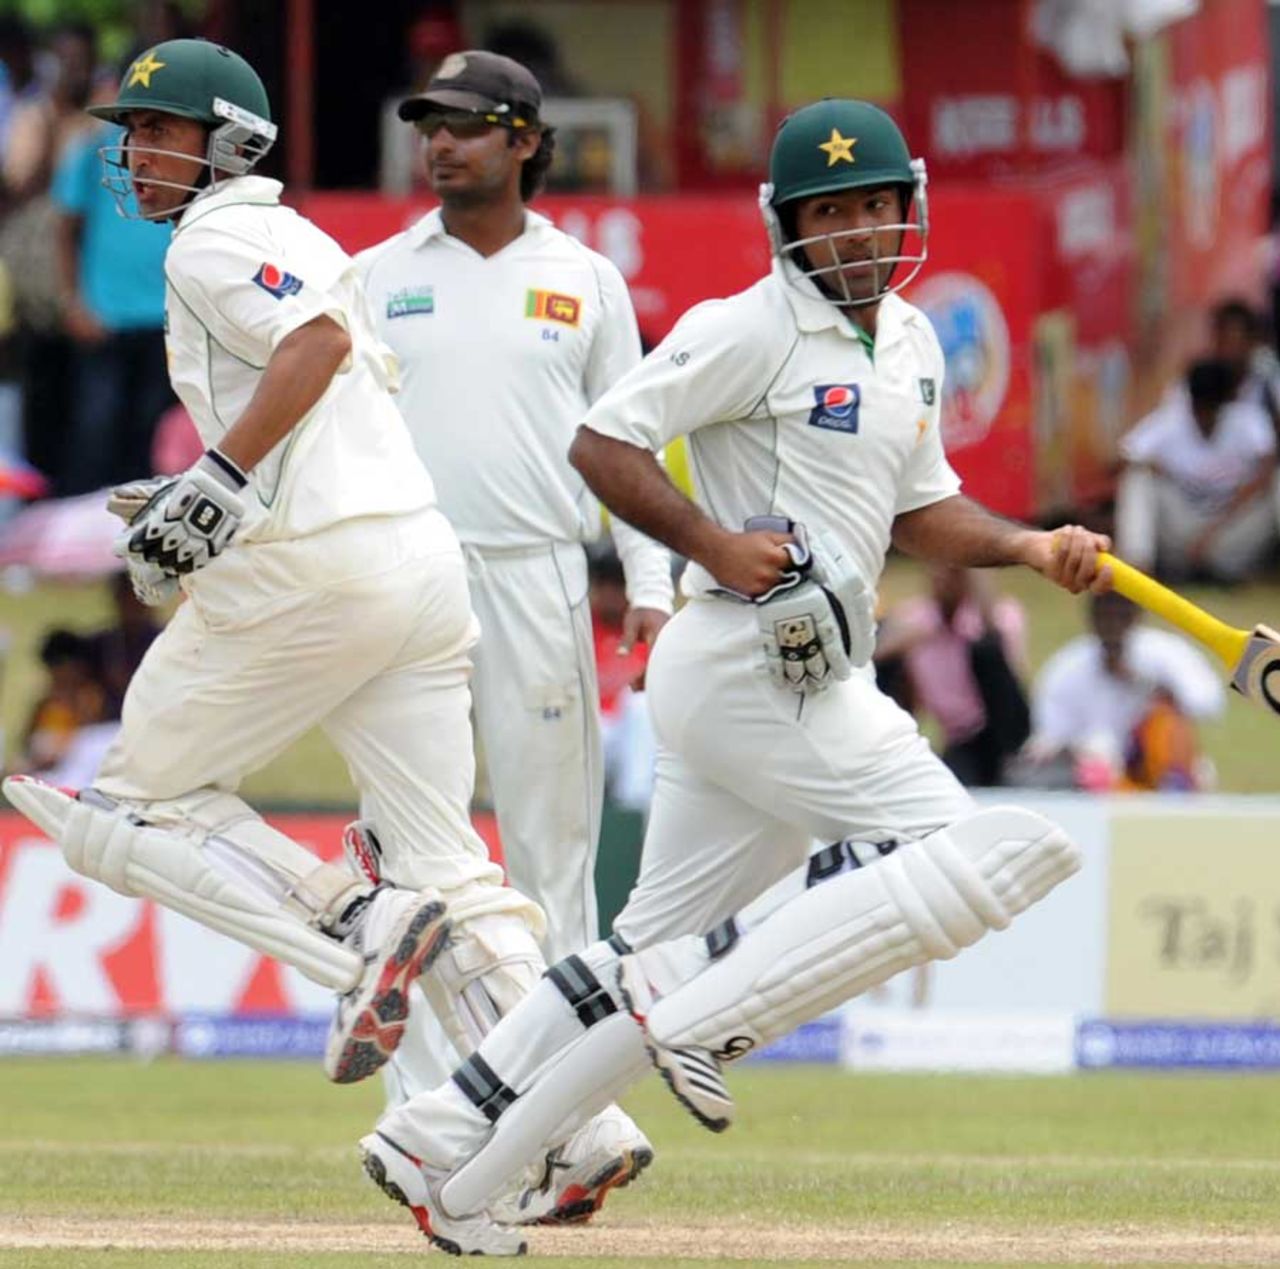 Younis Khan and Asad Shafiq were involved in a 151-run stand, Sri Lanka v Pakistan, 1st Test, Galle, 4th day, June 25, 2012